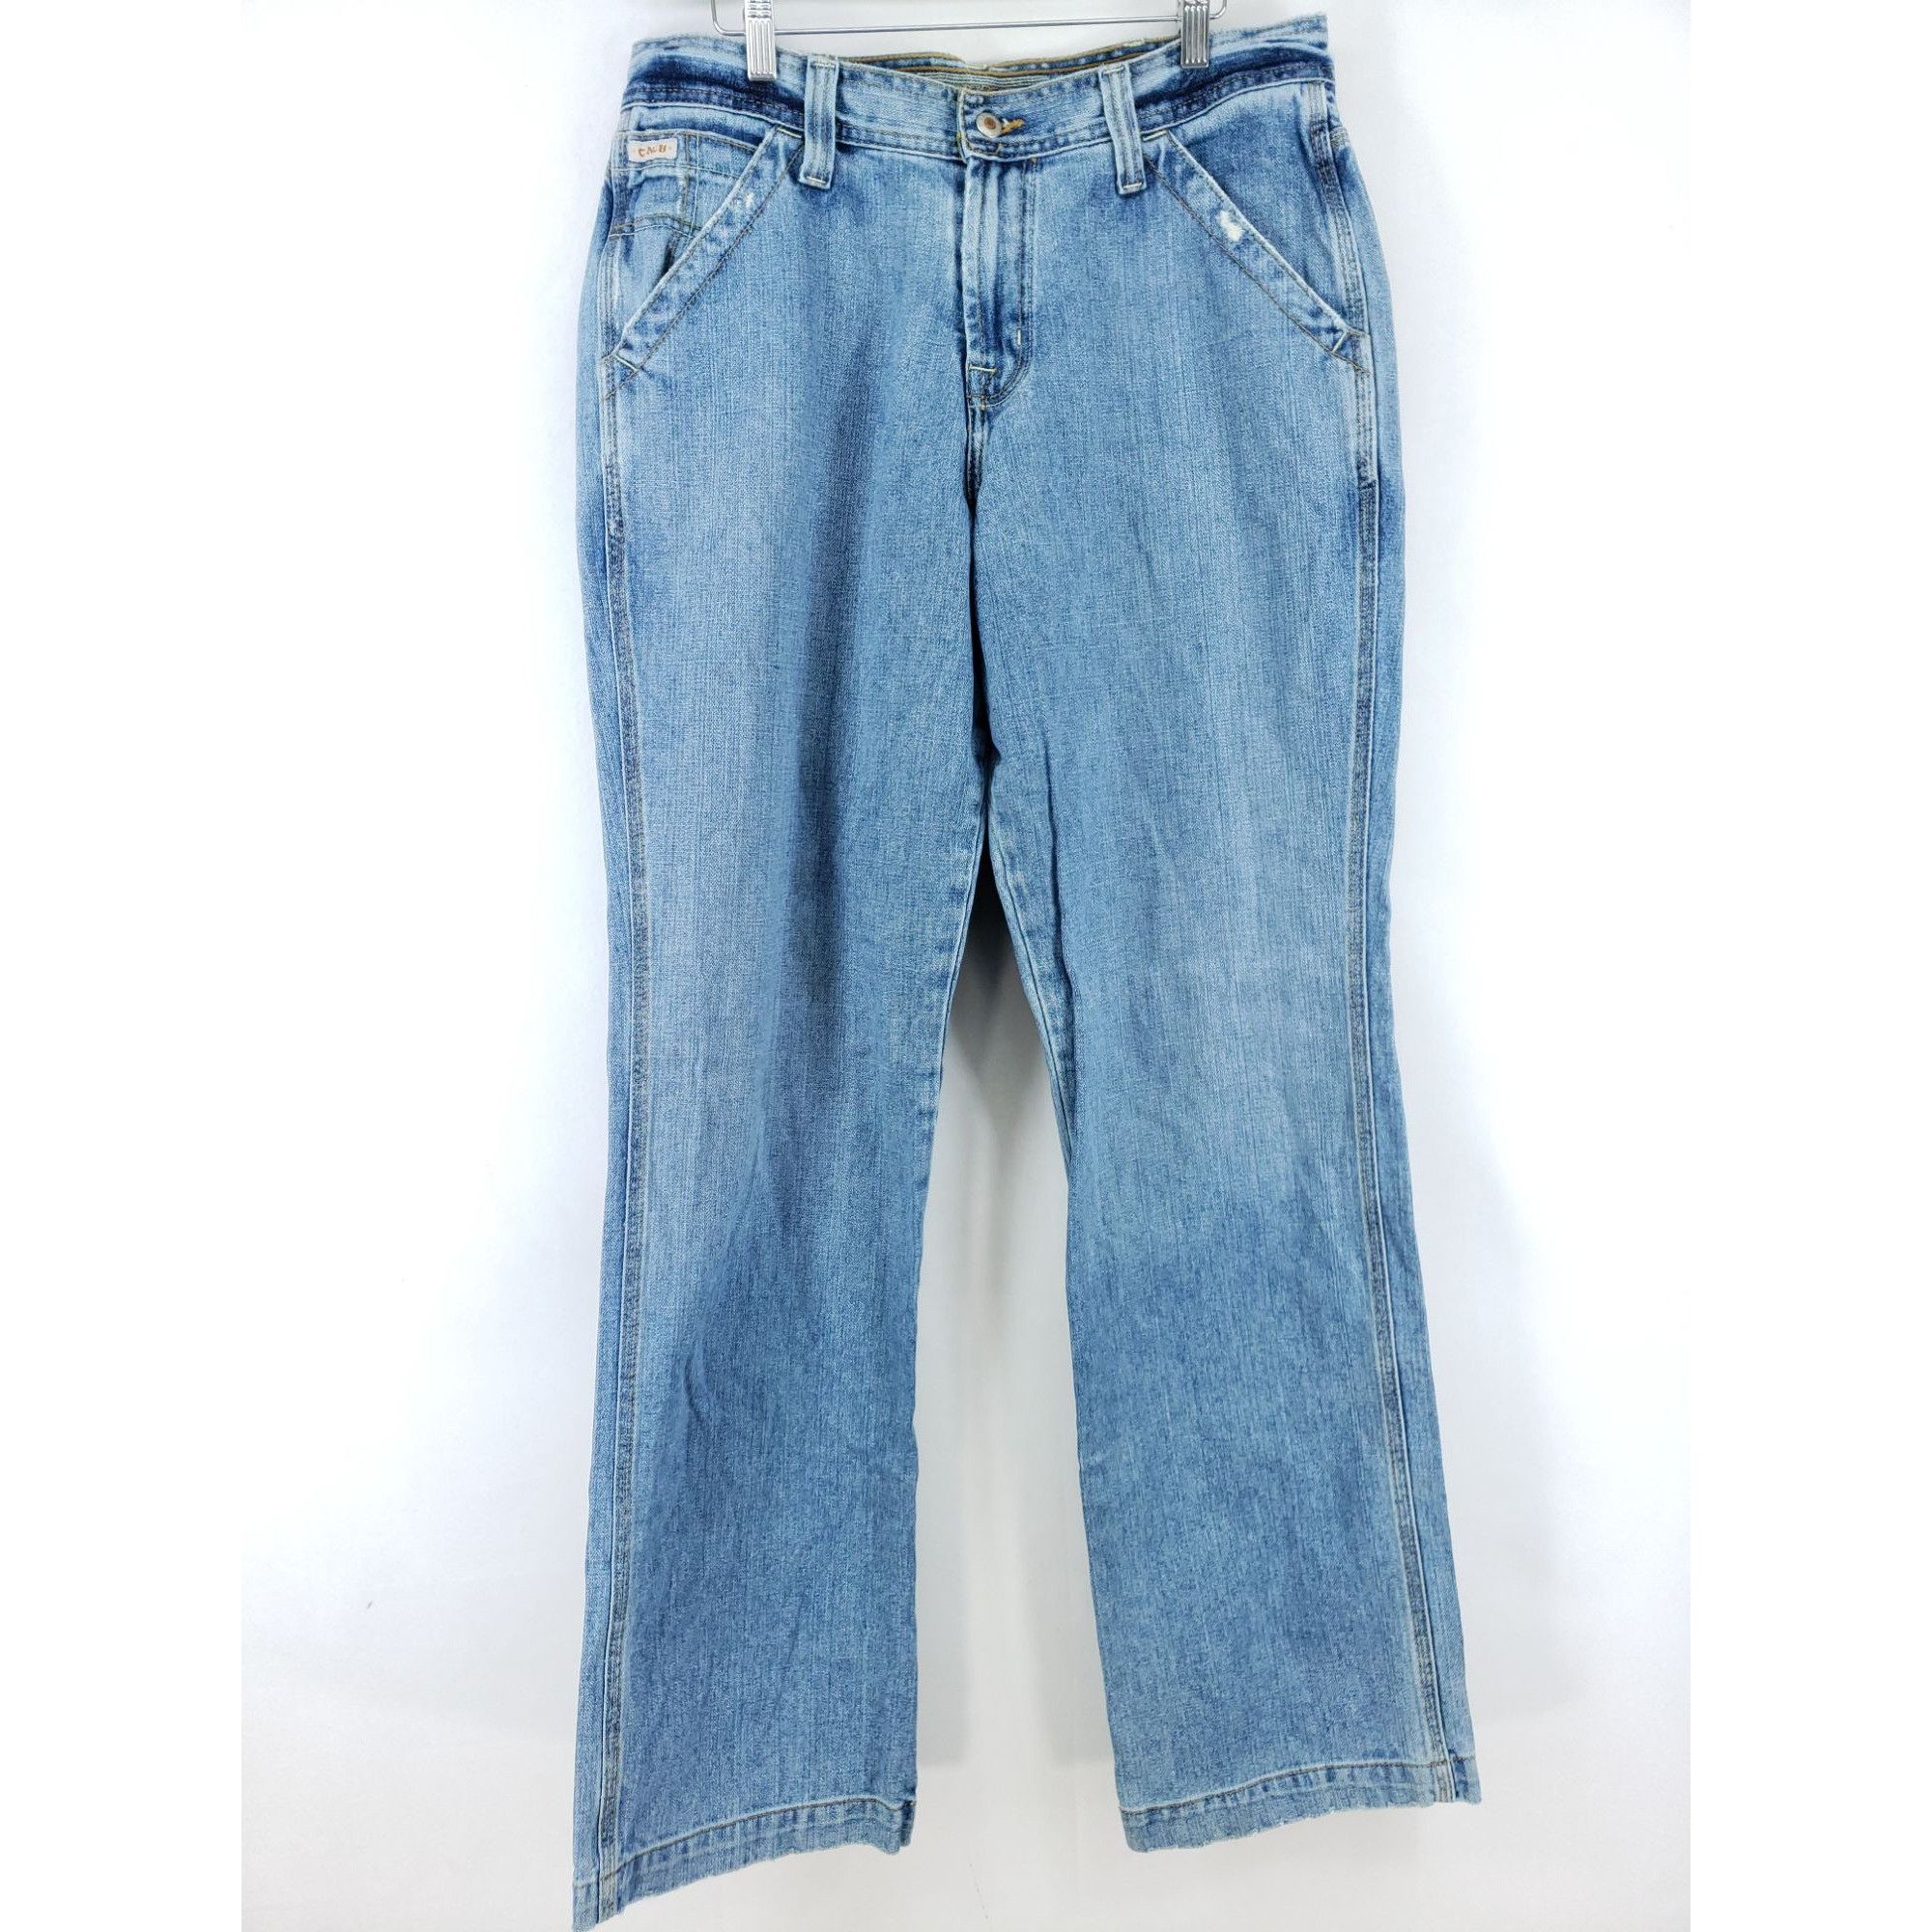 Cinch Cinch Relaxed Fit Jeans Men's Size 34/36 Distressed Light Size US 34 / EU 50 - 1 Preview